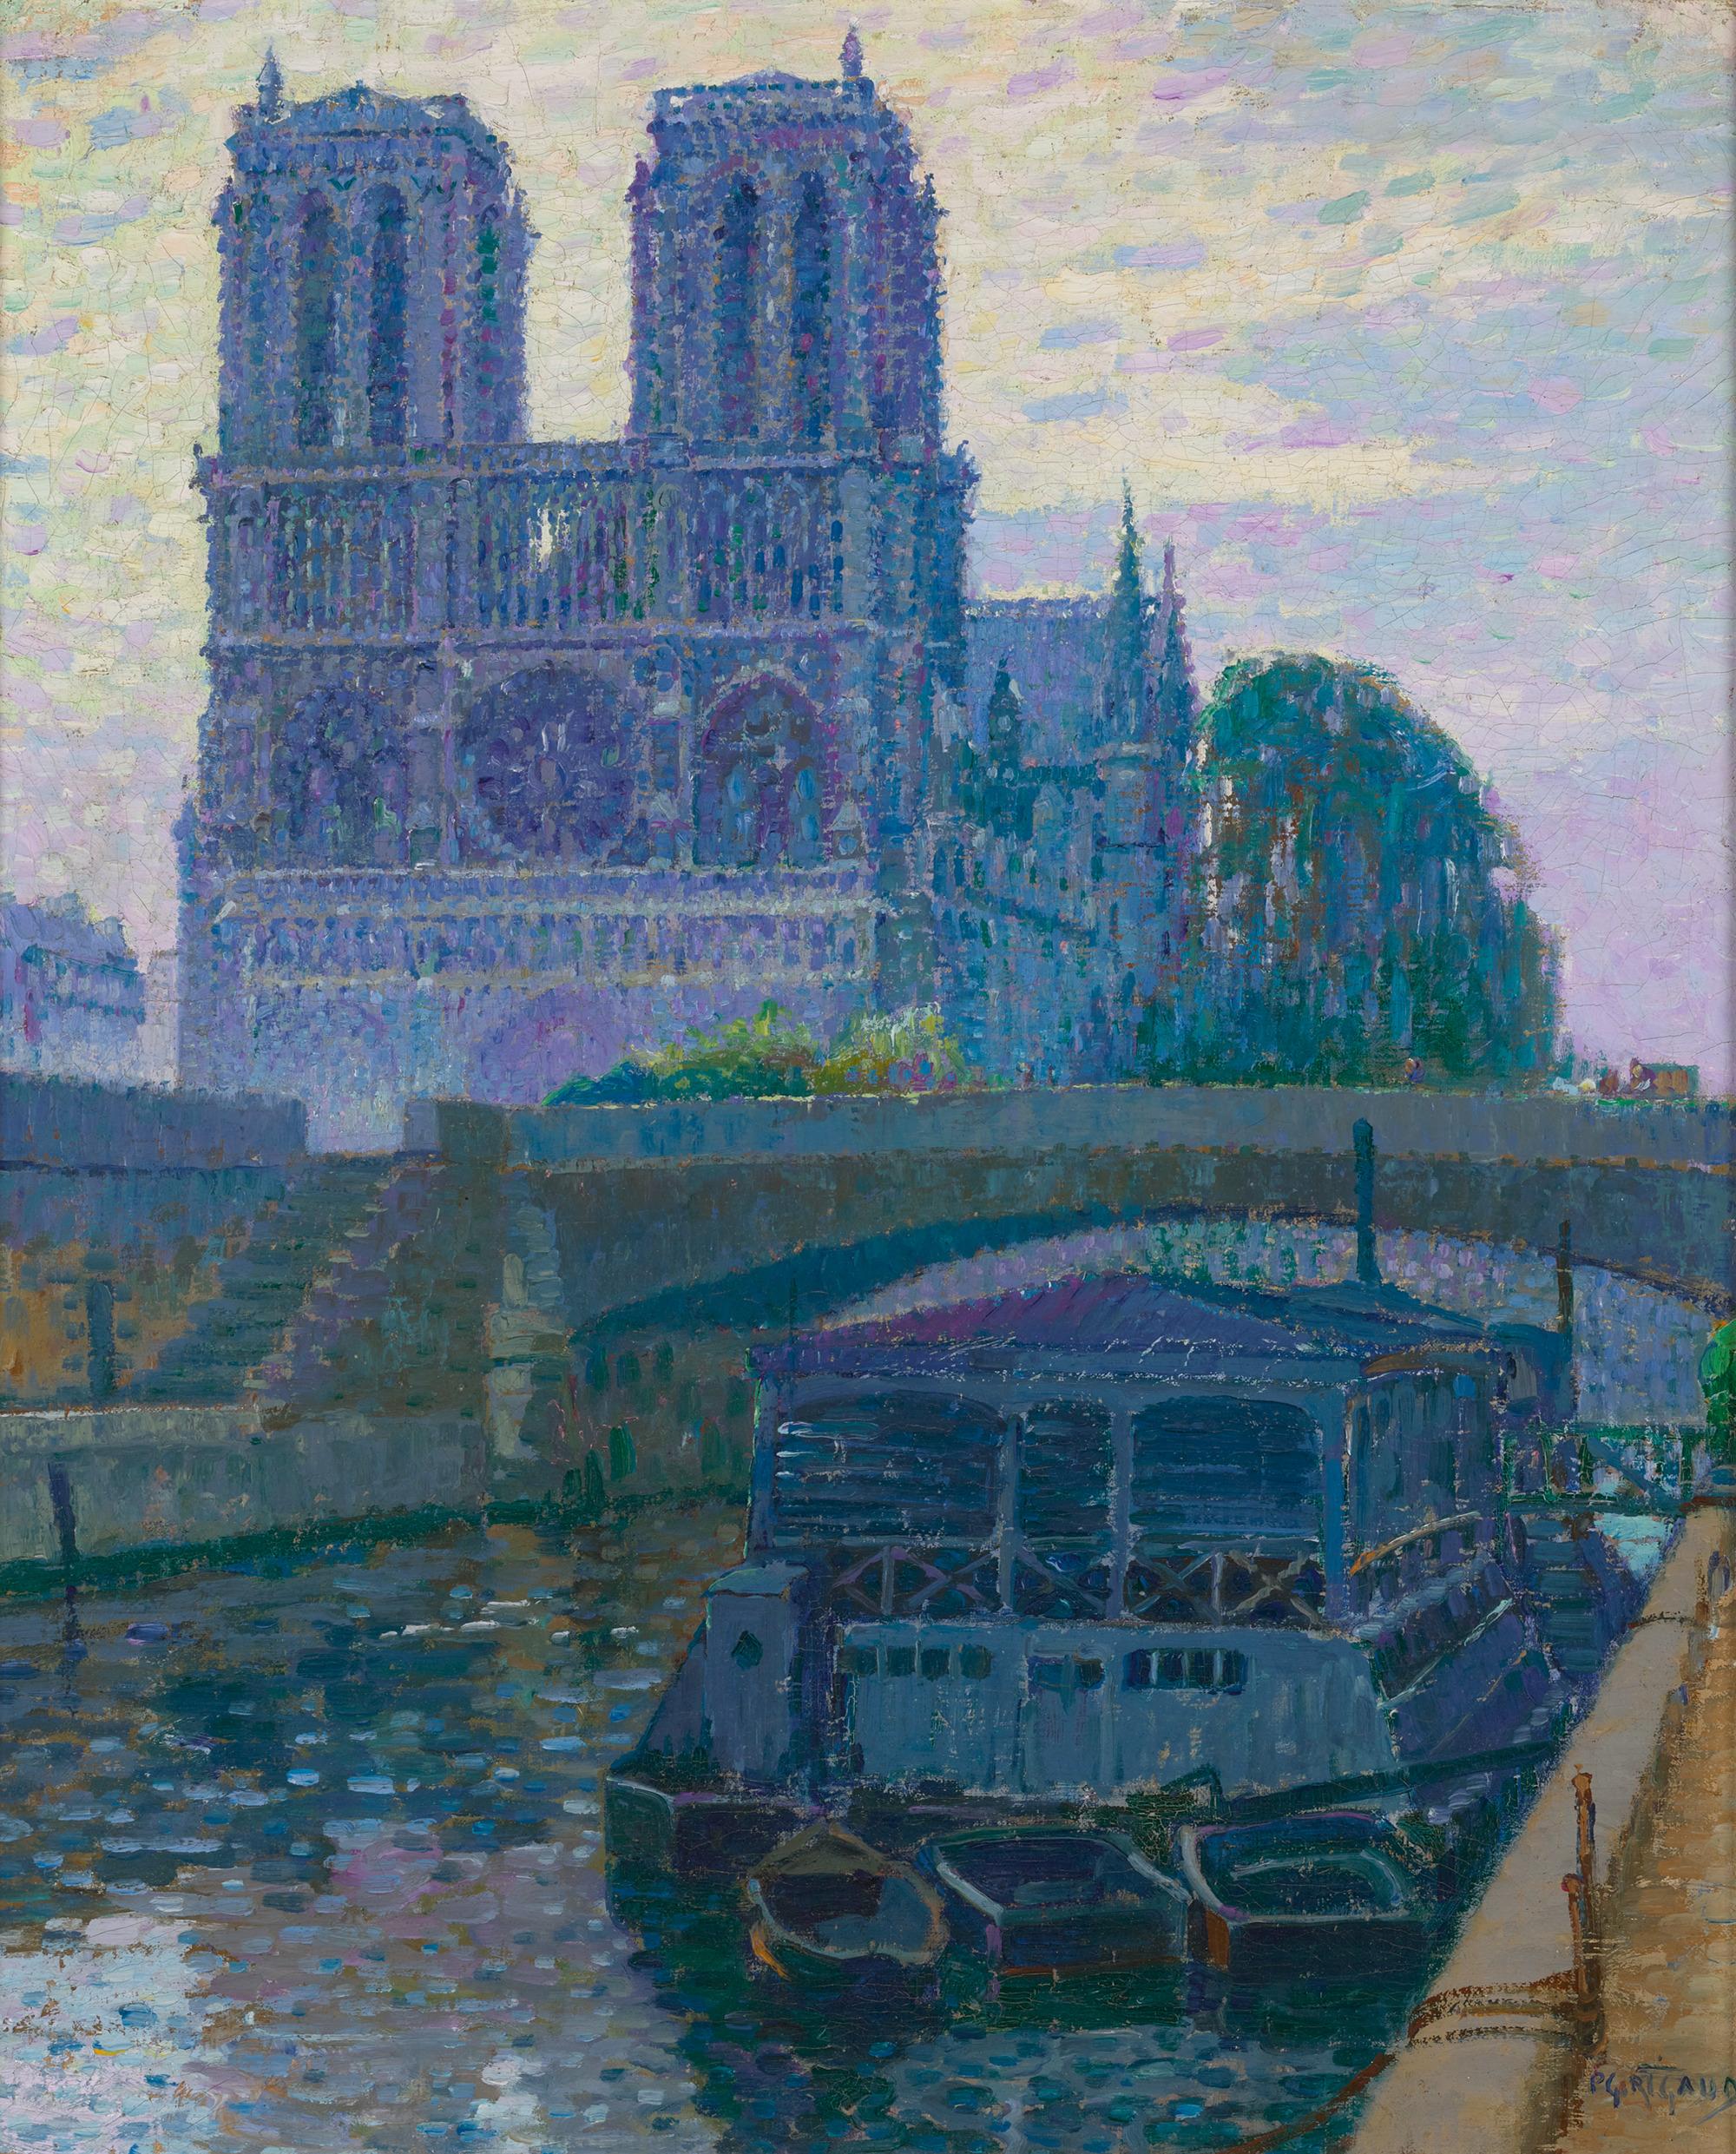 Pierre Gaston Rigaud
1874–1939  French

Notre Dame, Paris

Oil on canvas
Signed "P. G. Rigaud" (lower right)

This extraordinary oil on canvas titled Notre Dame, Paris is a magnificent snapshot of the City of Lights by the celebrated French artist